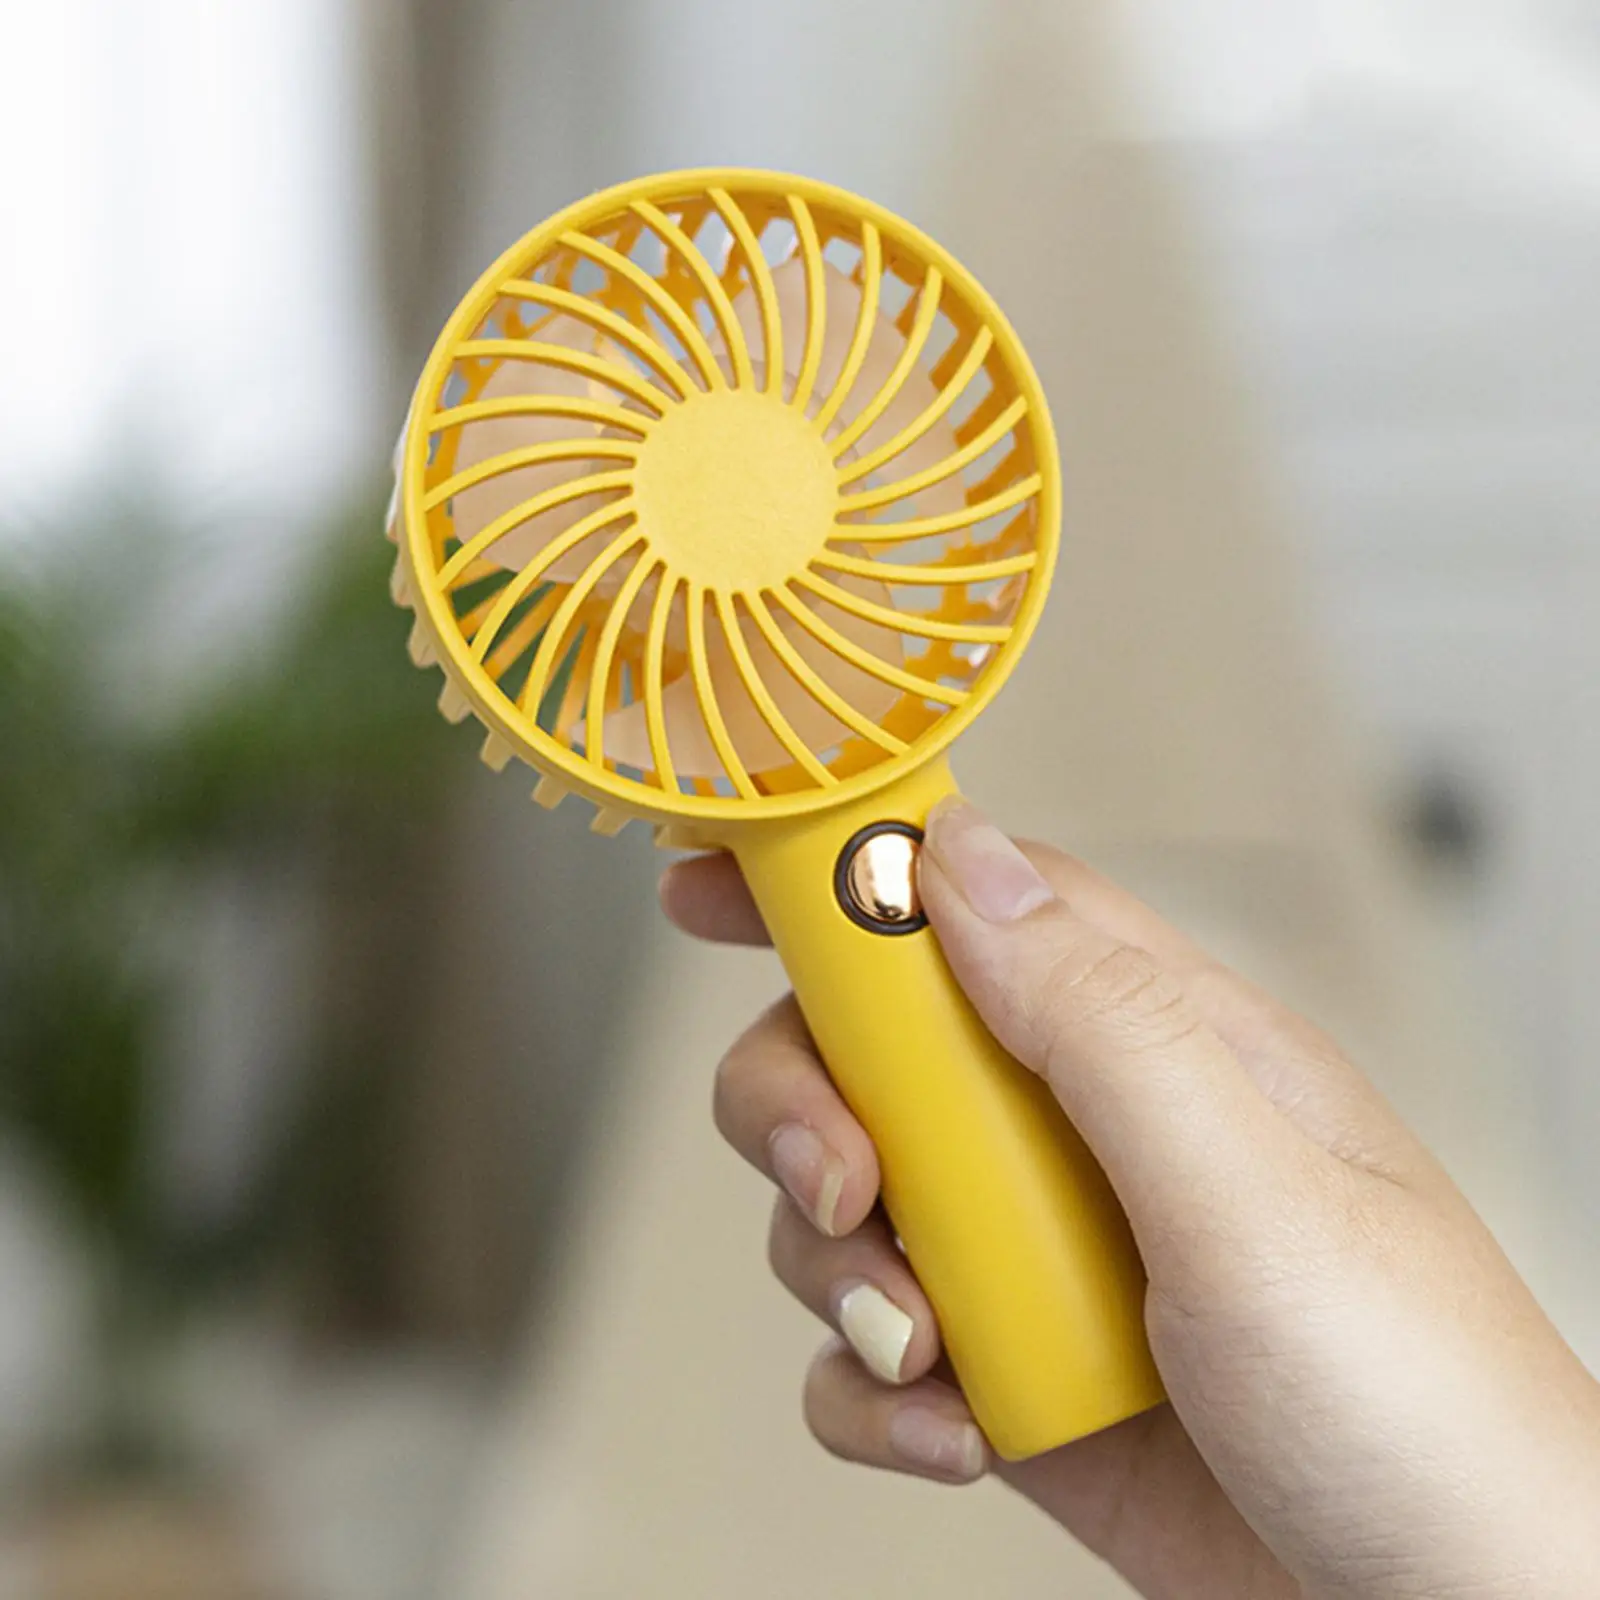 Handheld Portable Fan Small Hand Fan Cooling Face Fan 500mAh with Base for Makeup Indoor Outdoor Office Kids Gift Low Noise